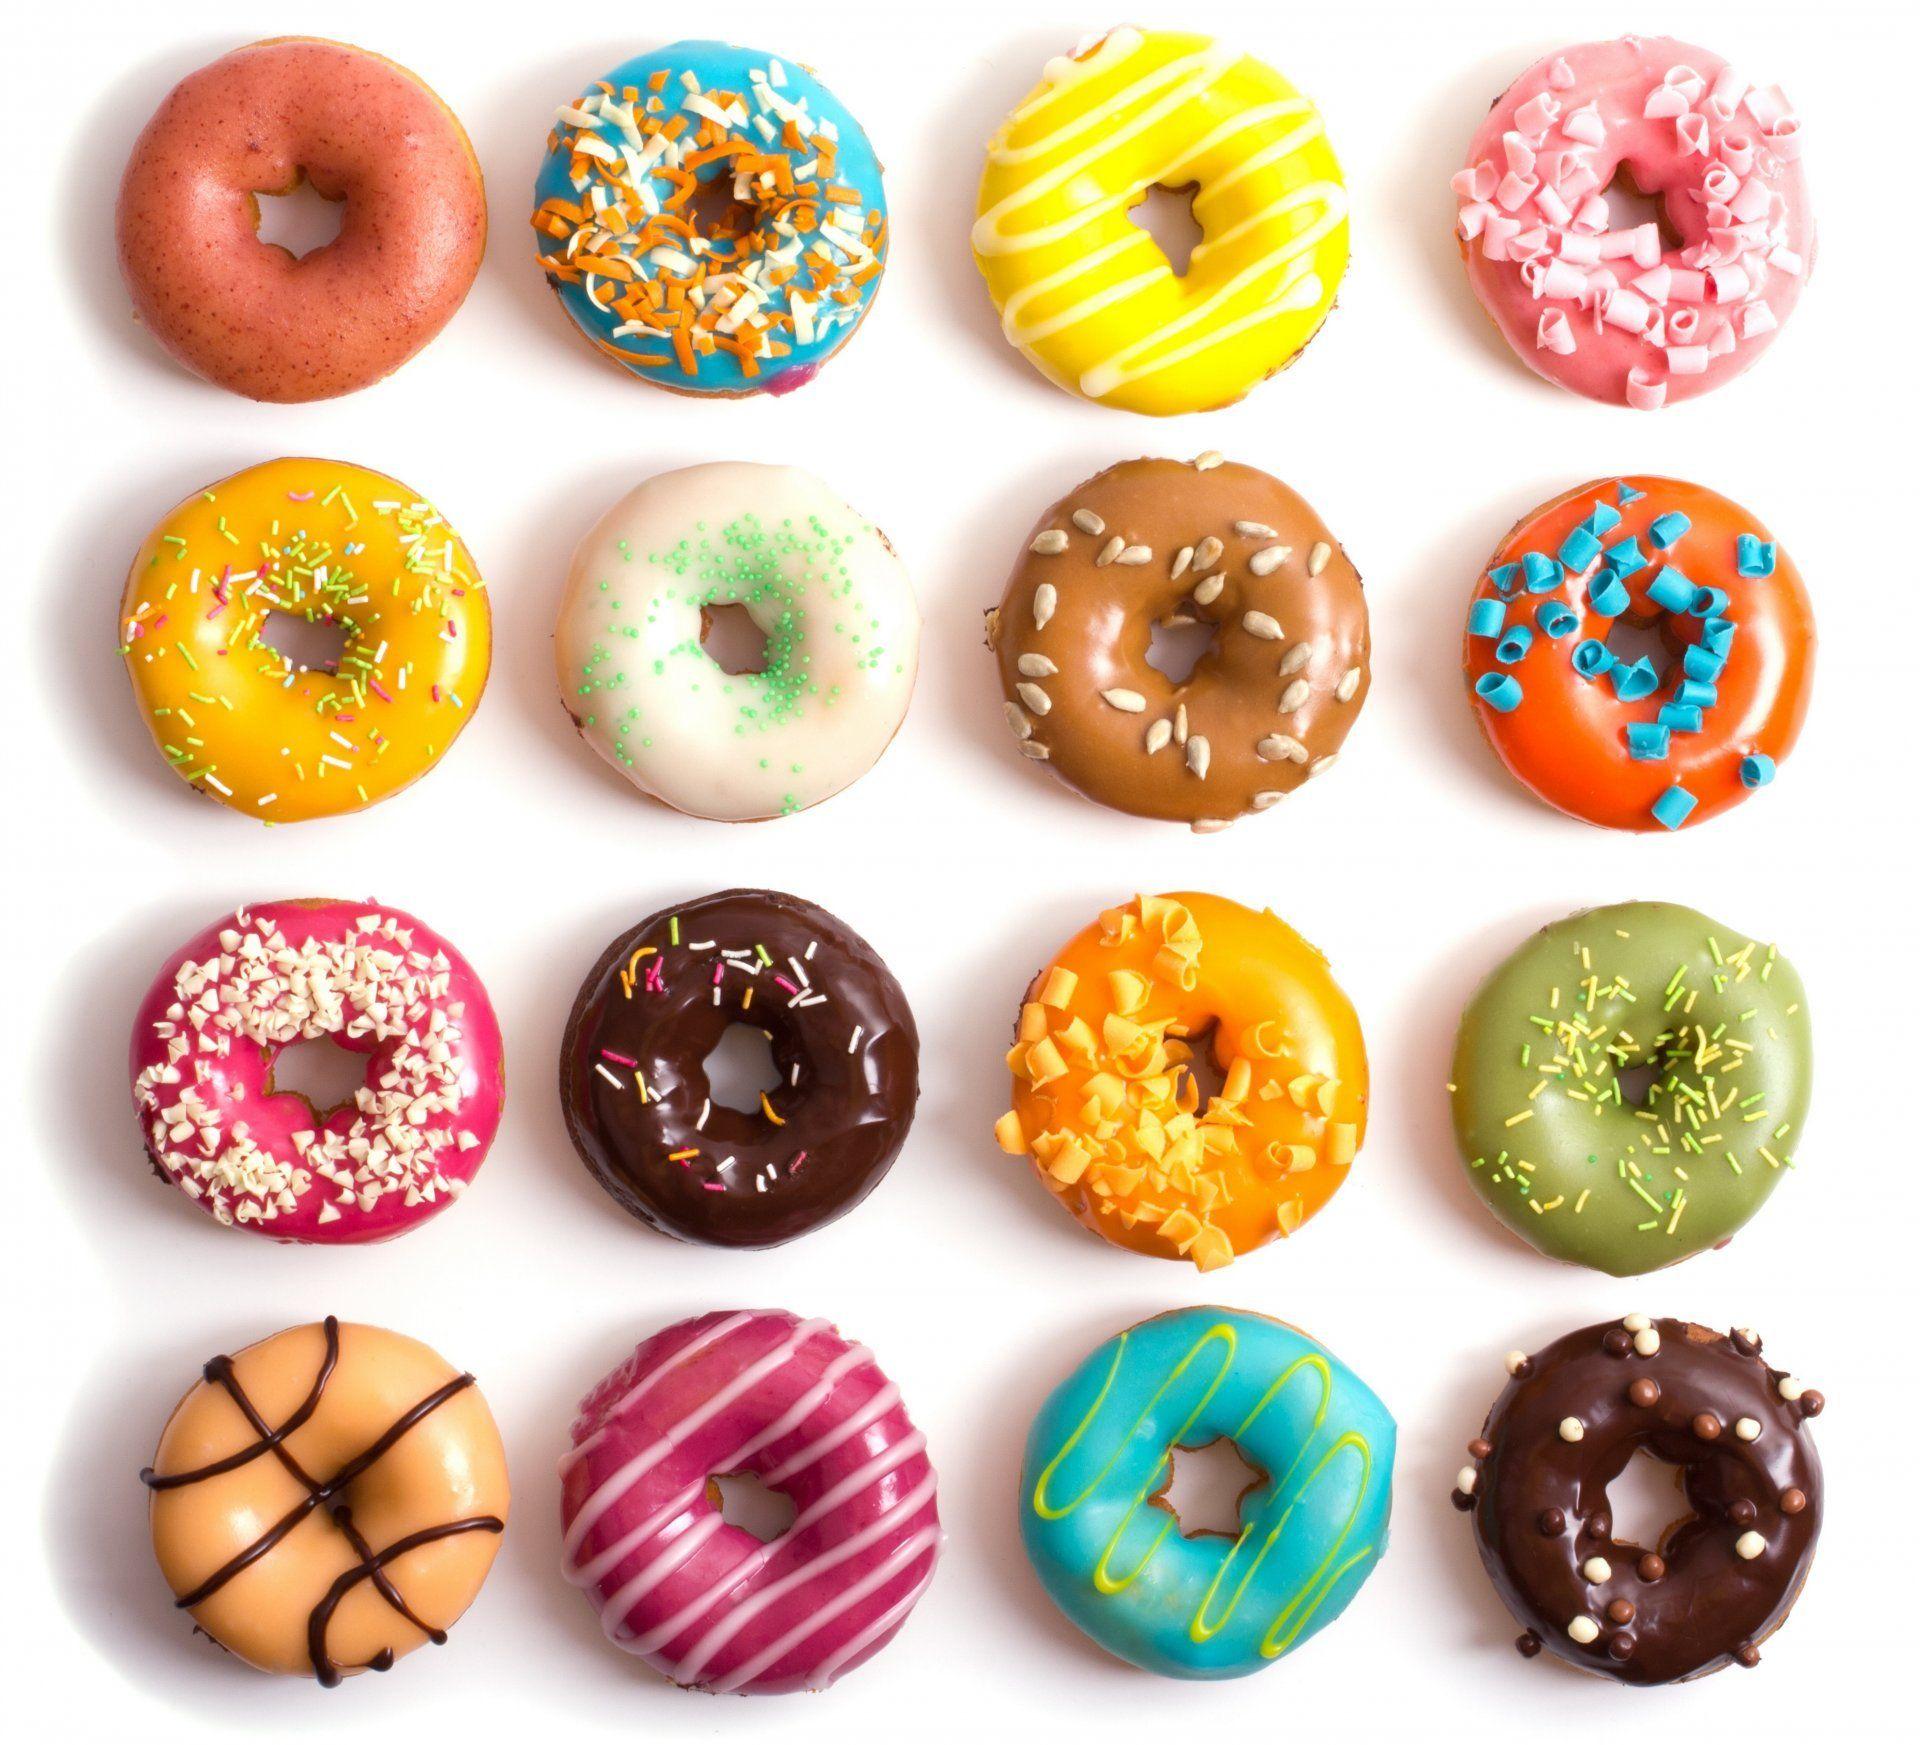 Colorful Donut Wallpaper, Donut.Printable Free Download